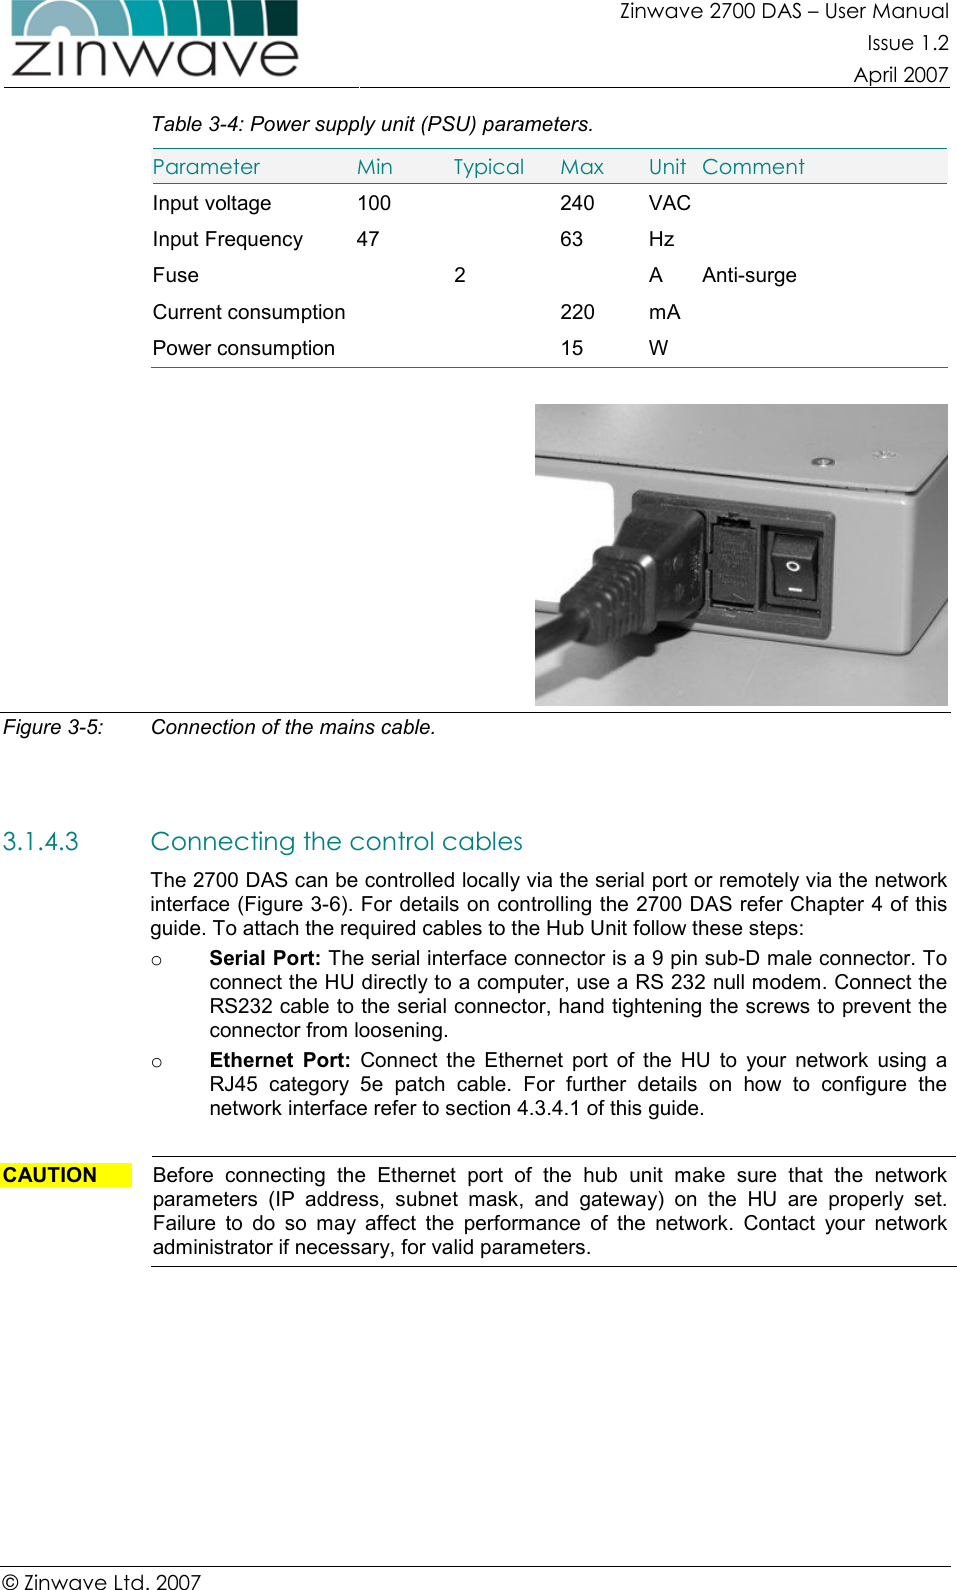 Zinwave 2700 DAS – User Manual Issue 1.2  April 2007  © Zinwave Ltd. 2007  Table 3-4: Power supply unit (PSU) parameters. Parameter  Min  Typical  Max  Unit  Comment Input voltage  100    240  VAC  Input Frequency  47    63  Hz   Fuse    2    A  Anti-surge Current consumption     220  mA   Power consumption      15  W     Figure 3-5:  Connection of the mains cable.   3.1.4.3 Connecting the control cables  The 2700 DAS can be controlled locally via the serial port or remotely via the network interface (Figure 3-6). For details on controlling the 2700 DAS refer Chapter 4 of this guide. To attach the required cables to the Hub Unit follow these steps: o Serial Port: The serial interface connector is a 9 pin sub-D male connector. To connect the HU directly to a computer, use a RS 232 null modem. Connect the RS232 cable to the serial connector, hand tightening the screws to prevent the connector from loosening. o Ethernet  Port:  Connect  the  Ethernet  port  of  the  HU  to  your  network  using  a RJ45  category  5e  patch  cable.  For  further  details  on  how  to  configure  the network interface refer to section 4.3.4.1 of this guide.  CAUTION  Before  connecting  the  Ethernet  port  of  the  hub  unit  make  sure  that  the  network parameters  (IP  address,  subnet  mask,  and  gateway)  on  the  HU  are  properly  set. Failure  to  do  so  may  affect  the  performance  of  the  network.  Contact  your  network administrator if necessary, for valid parameters.  